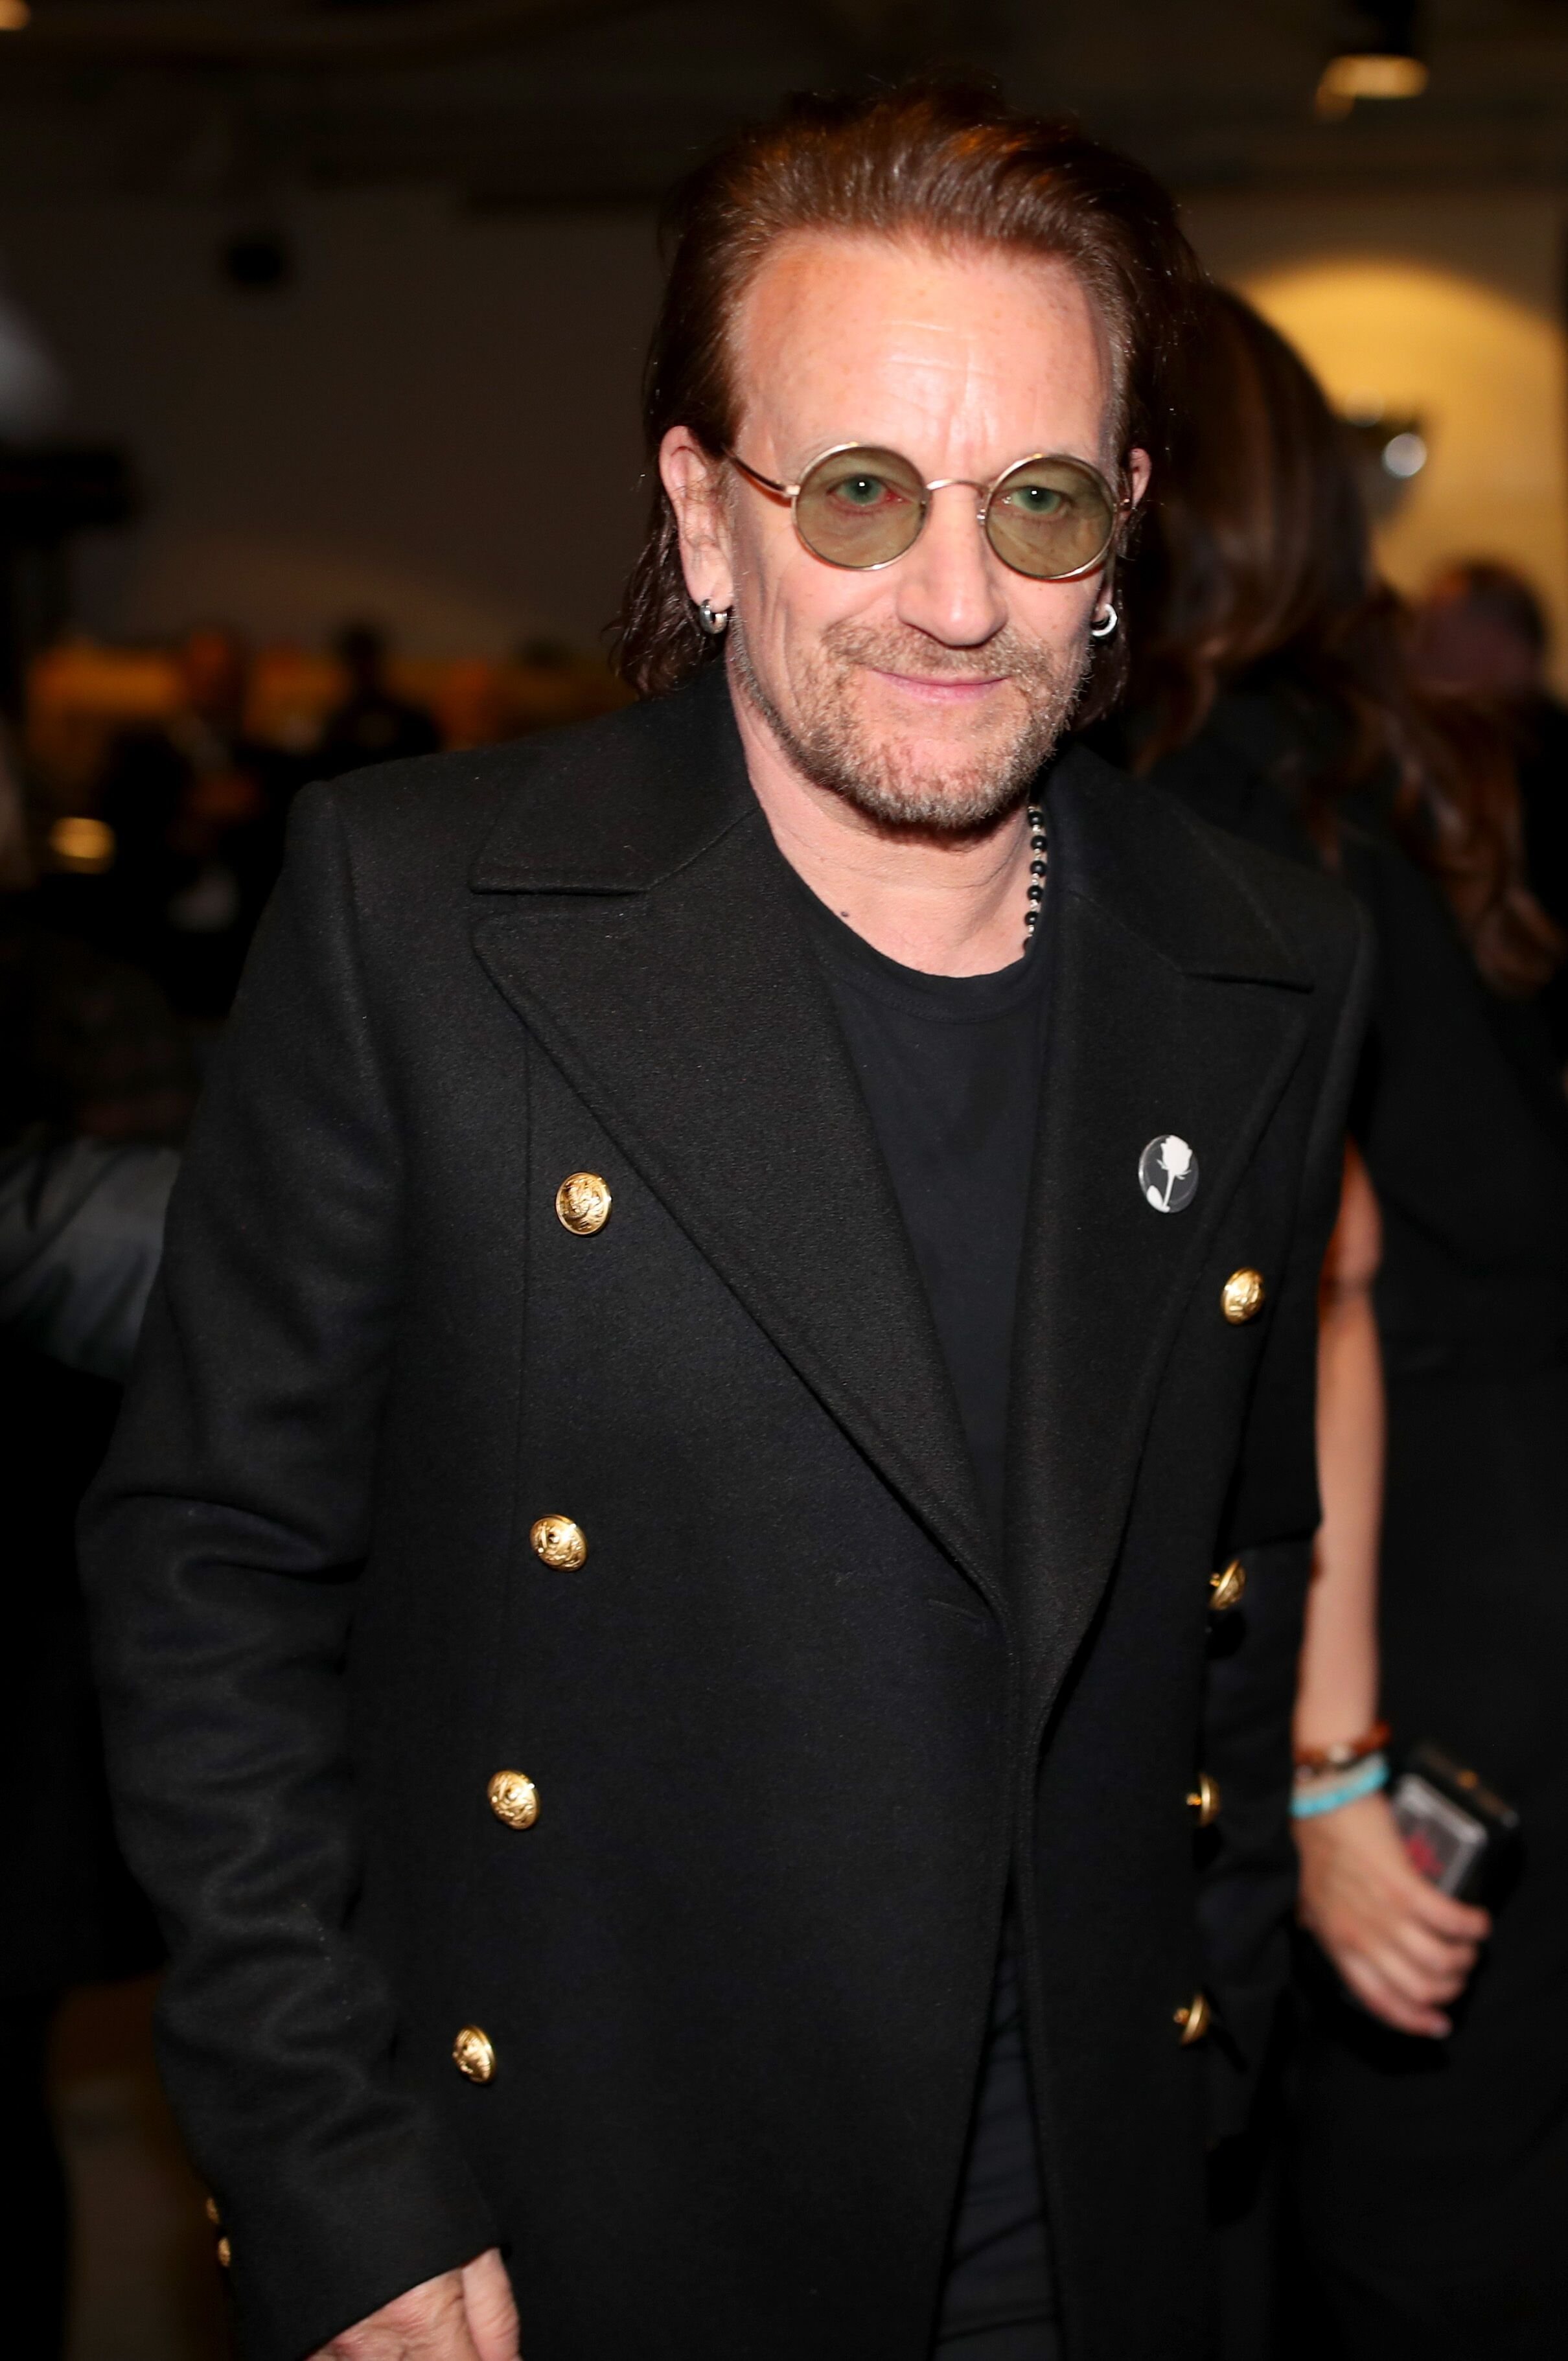 Recording artist Bono of U2 attends the 60th Annual GRAMMY Awards at Madison Square Garden on January 28, 2018 | Photo: Getty Images